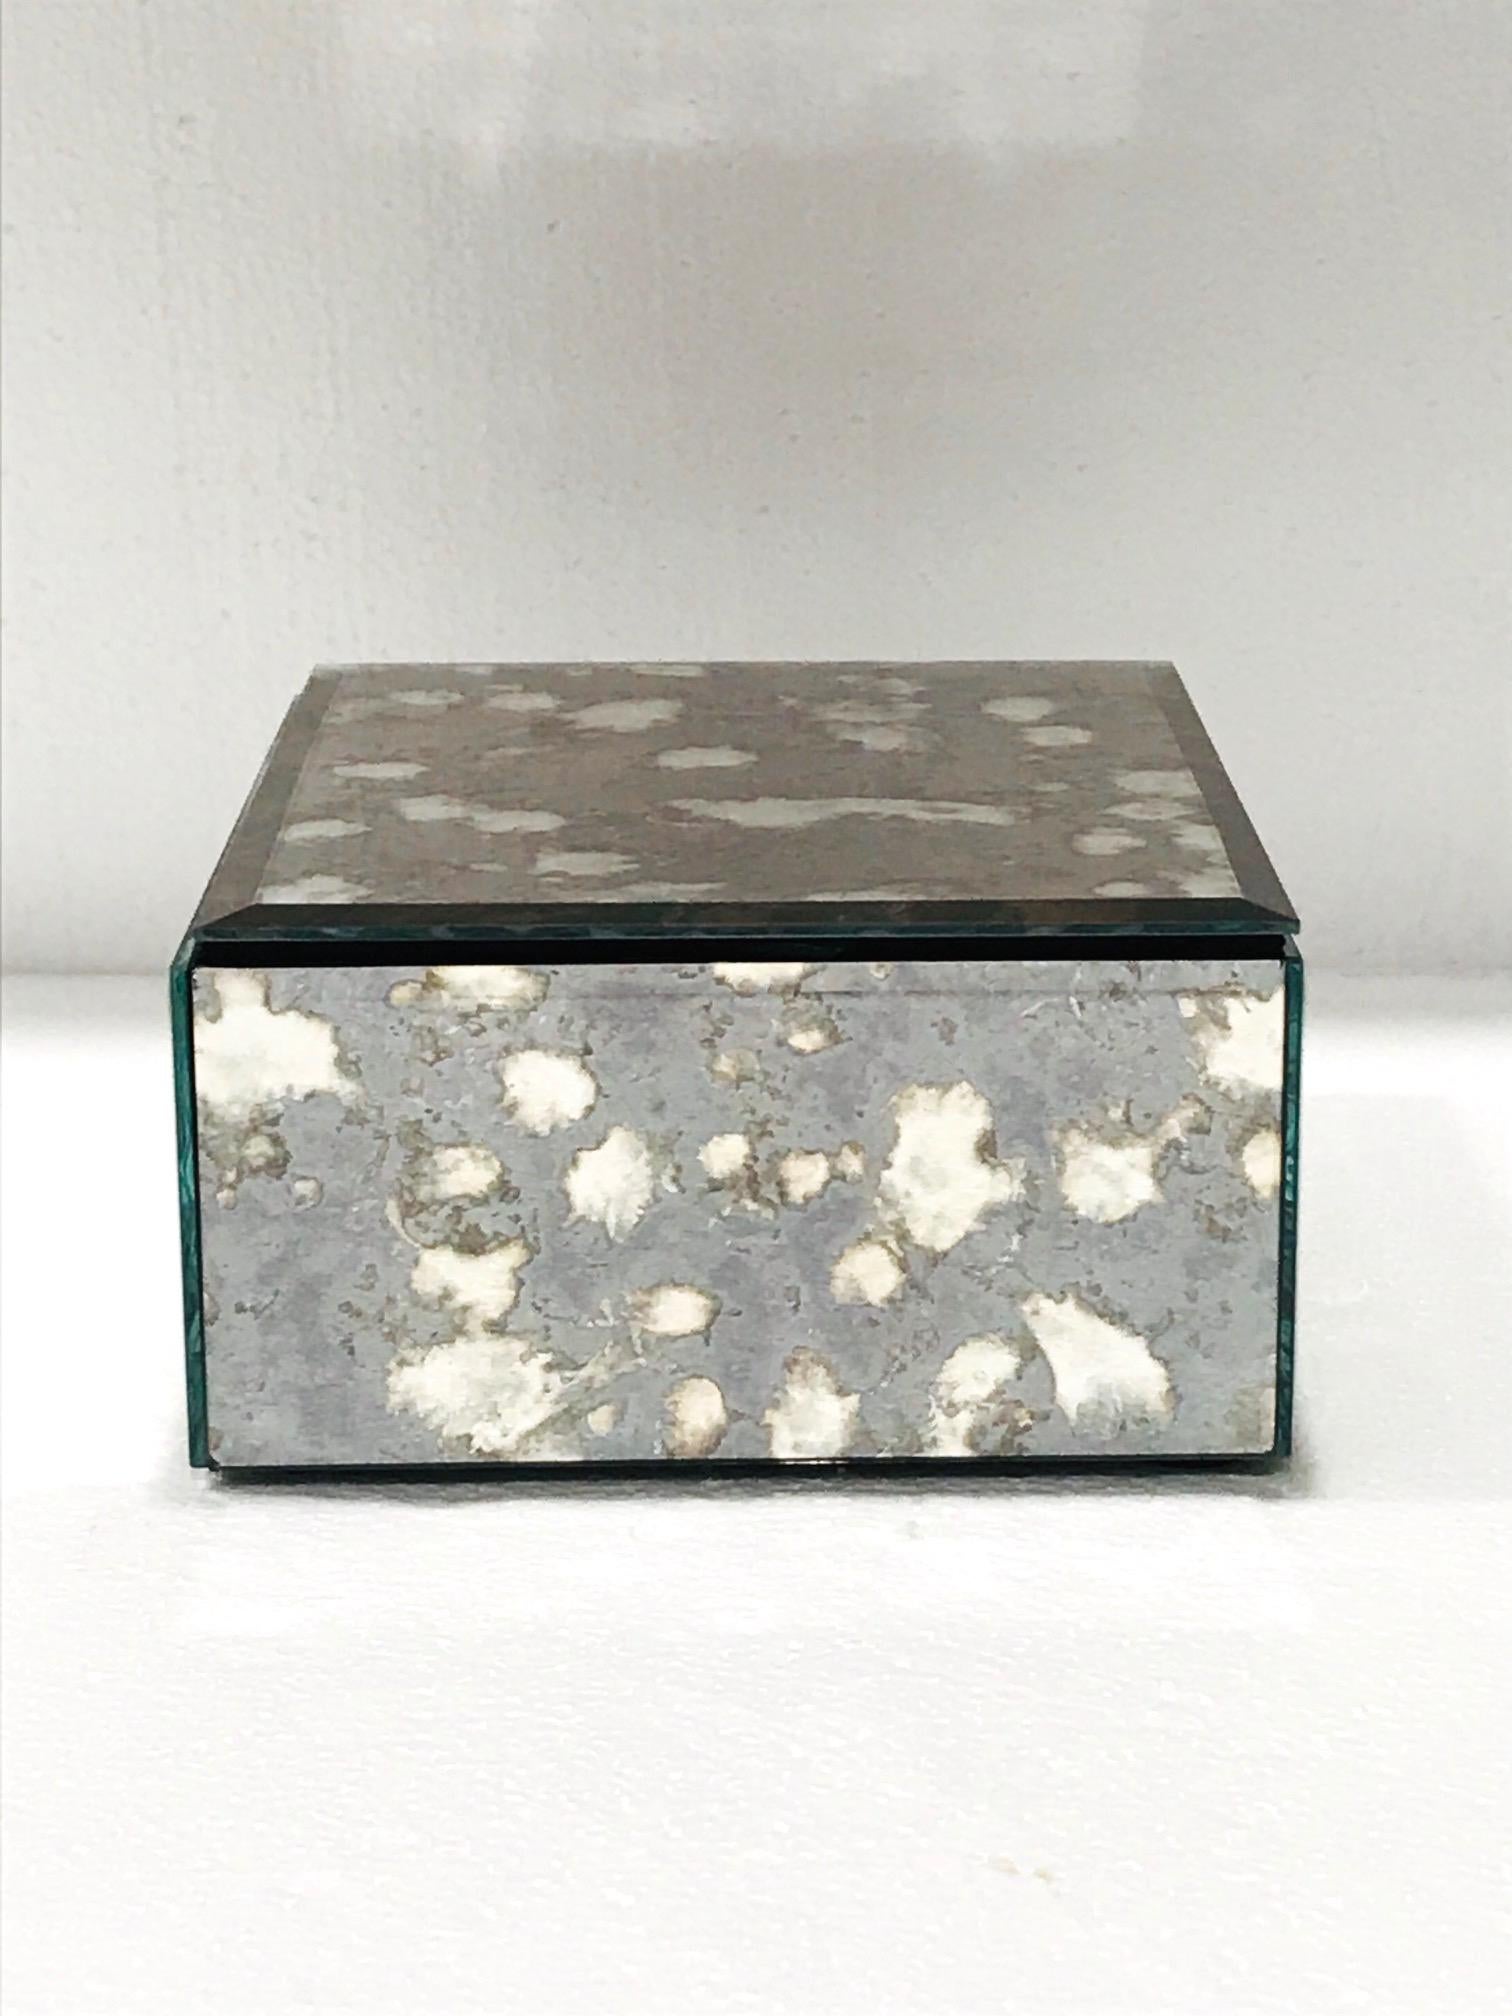 North American Vintage Antique Mirrored Jewelry Box in Smoke Grey and Bronze, circa 1990s